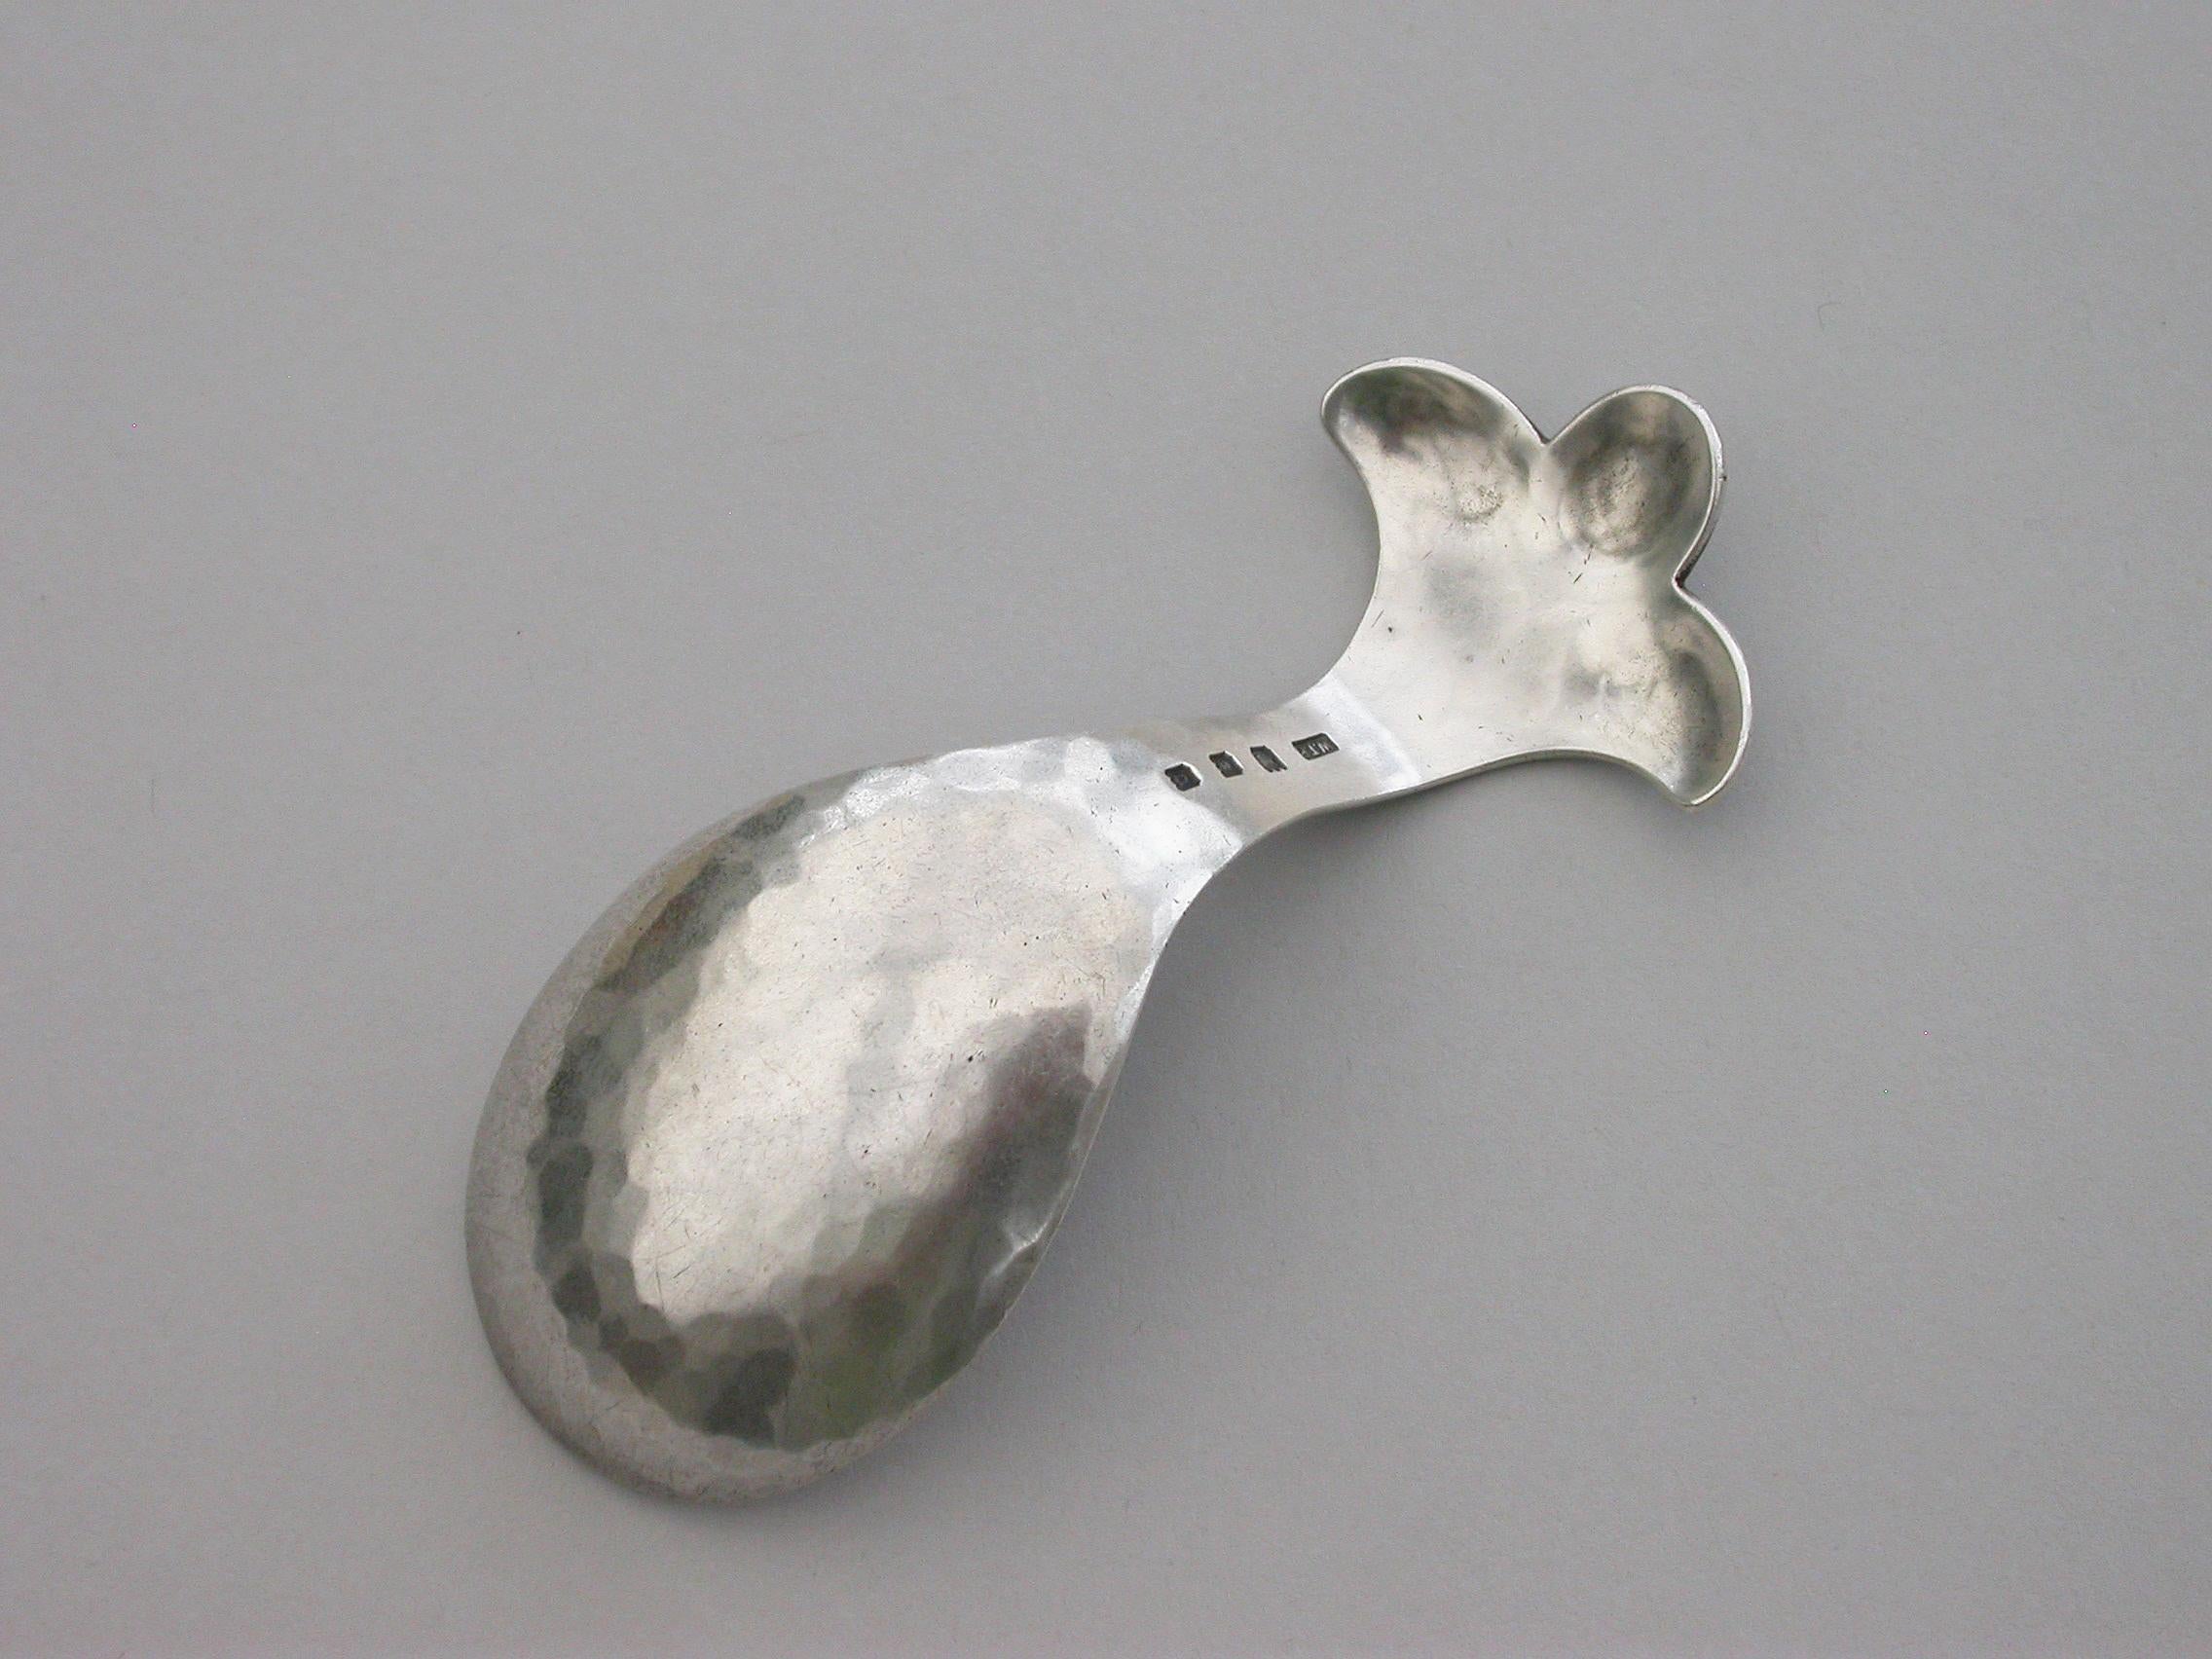 English Arts & Crafts Hammered Silver Trefoil Caddy Spoon by W T Pavitt, London, 1929 For Sale